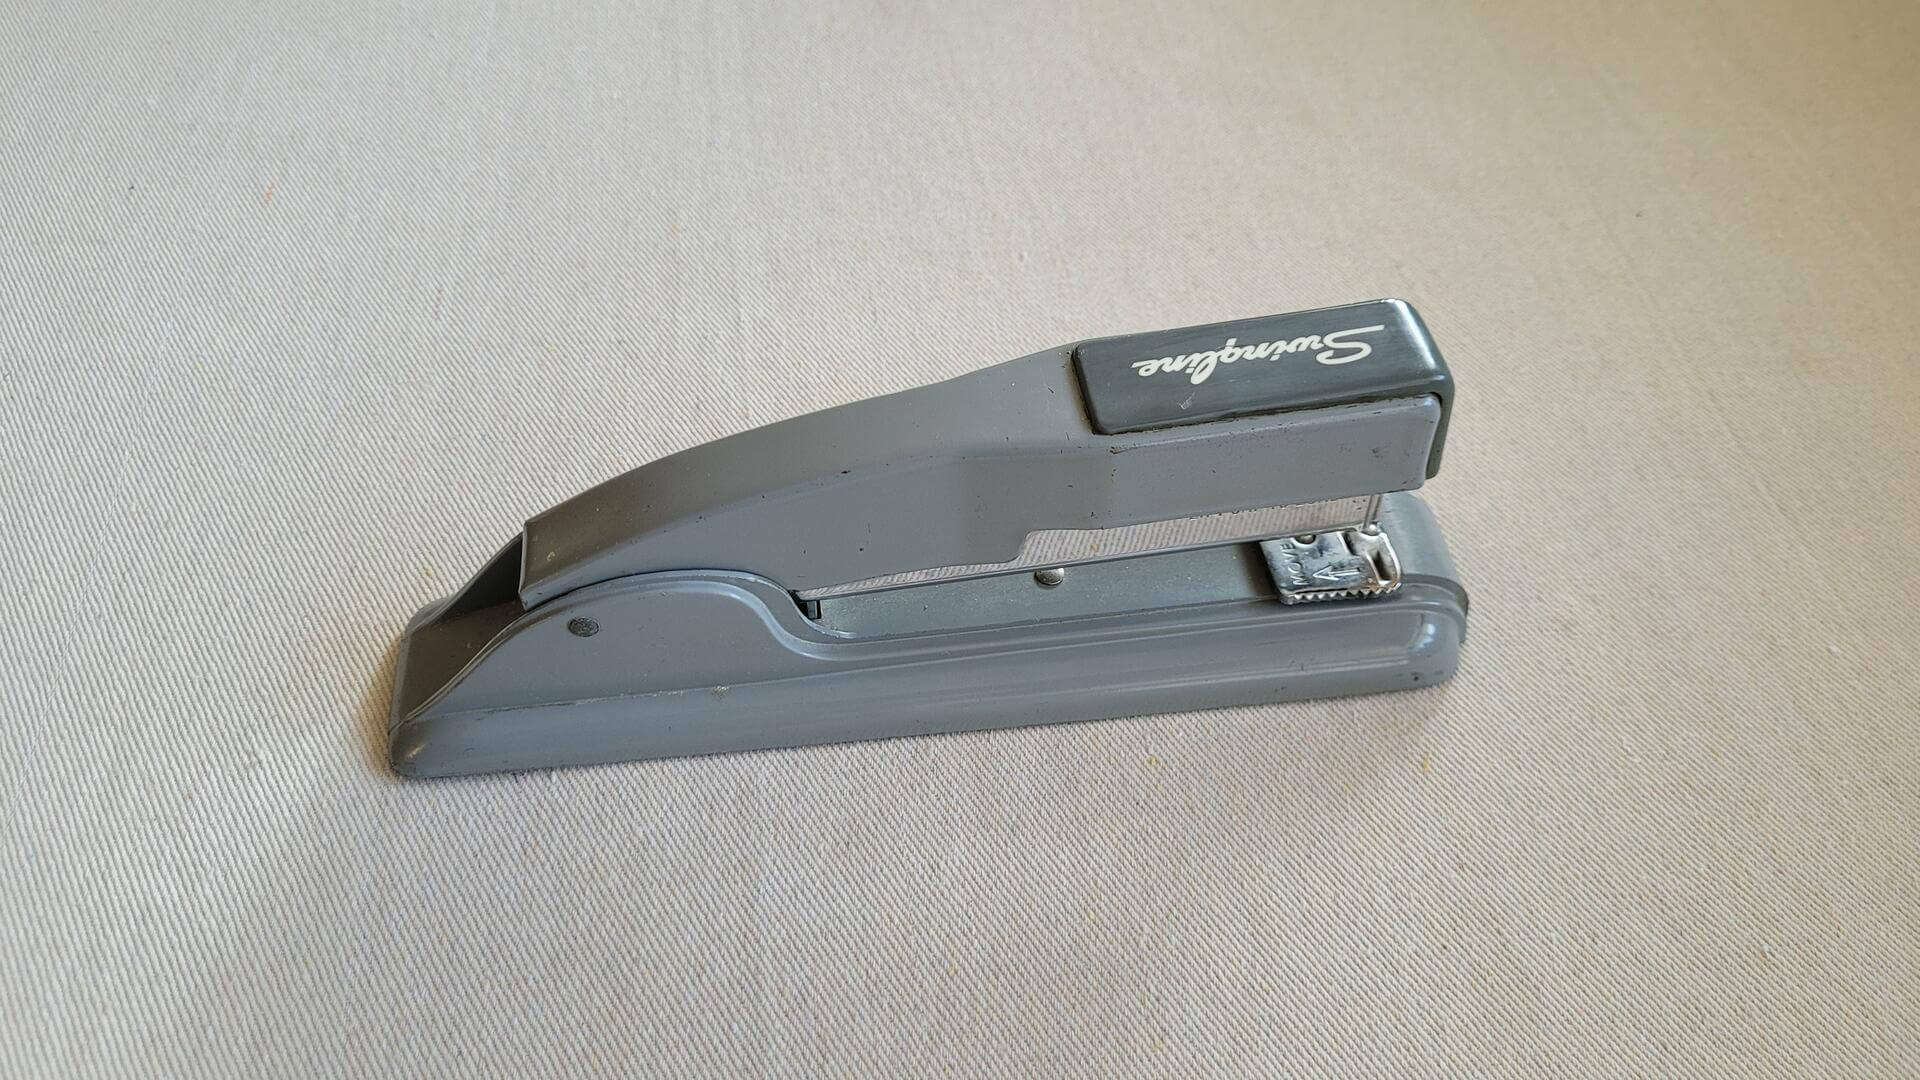 Retro 1950s swingline No. 27 steel Art Deco style stapler in battleship gray colour. Vintage made in USA MCM collectible office equipment & desk accessories